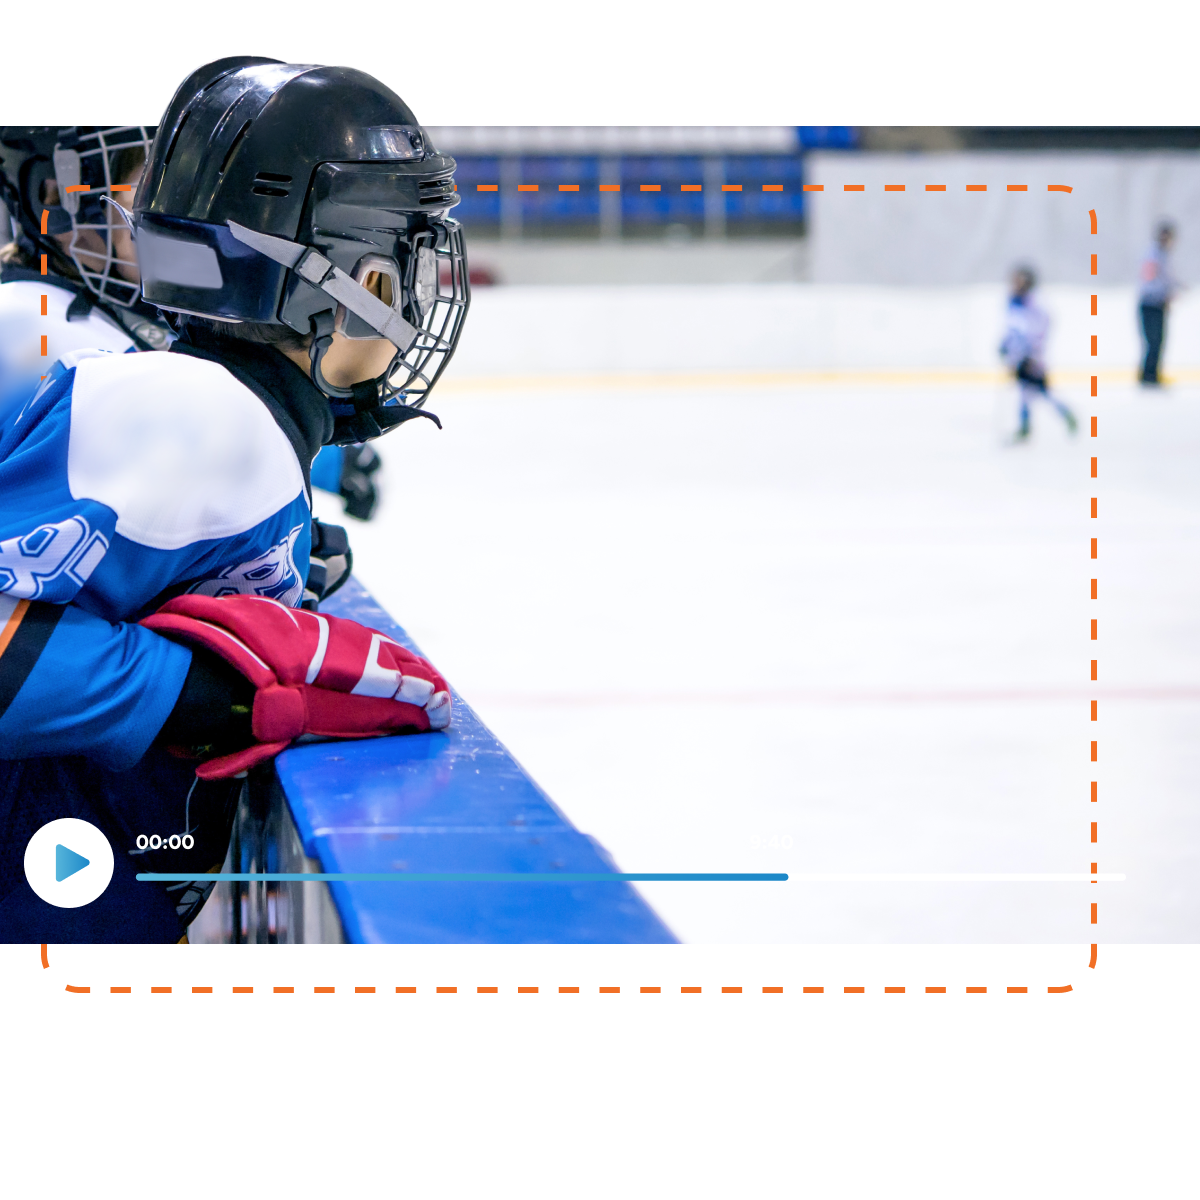 A young ice hockey player in a blue jersey leaning over the boards of an ice rink, watching teammates on the ice. A play button and timer at the bottom suggest the image is from a video, possibly for coaching or facility management software analysis.